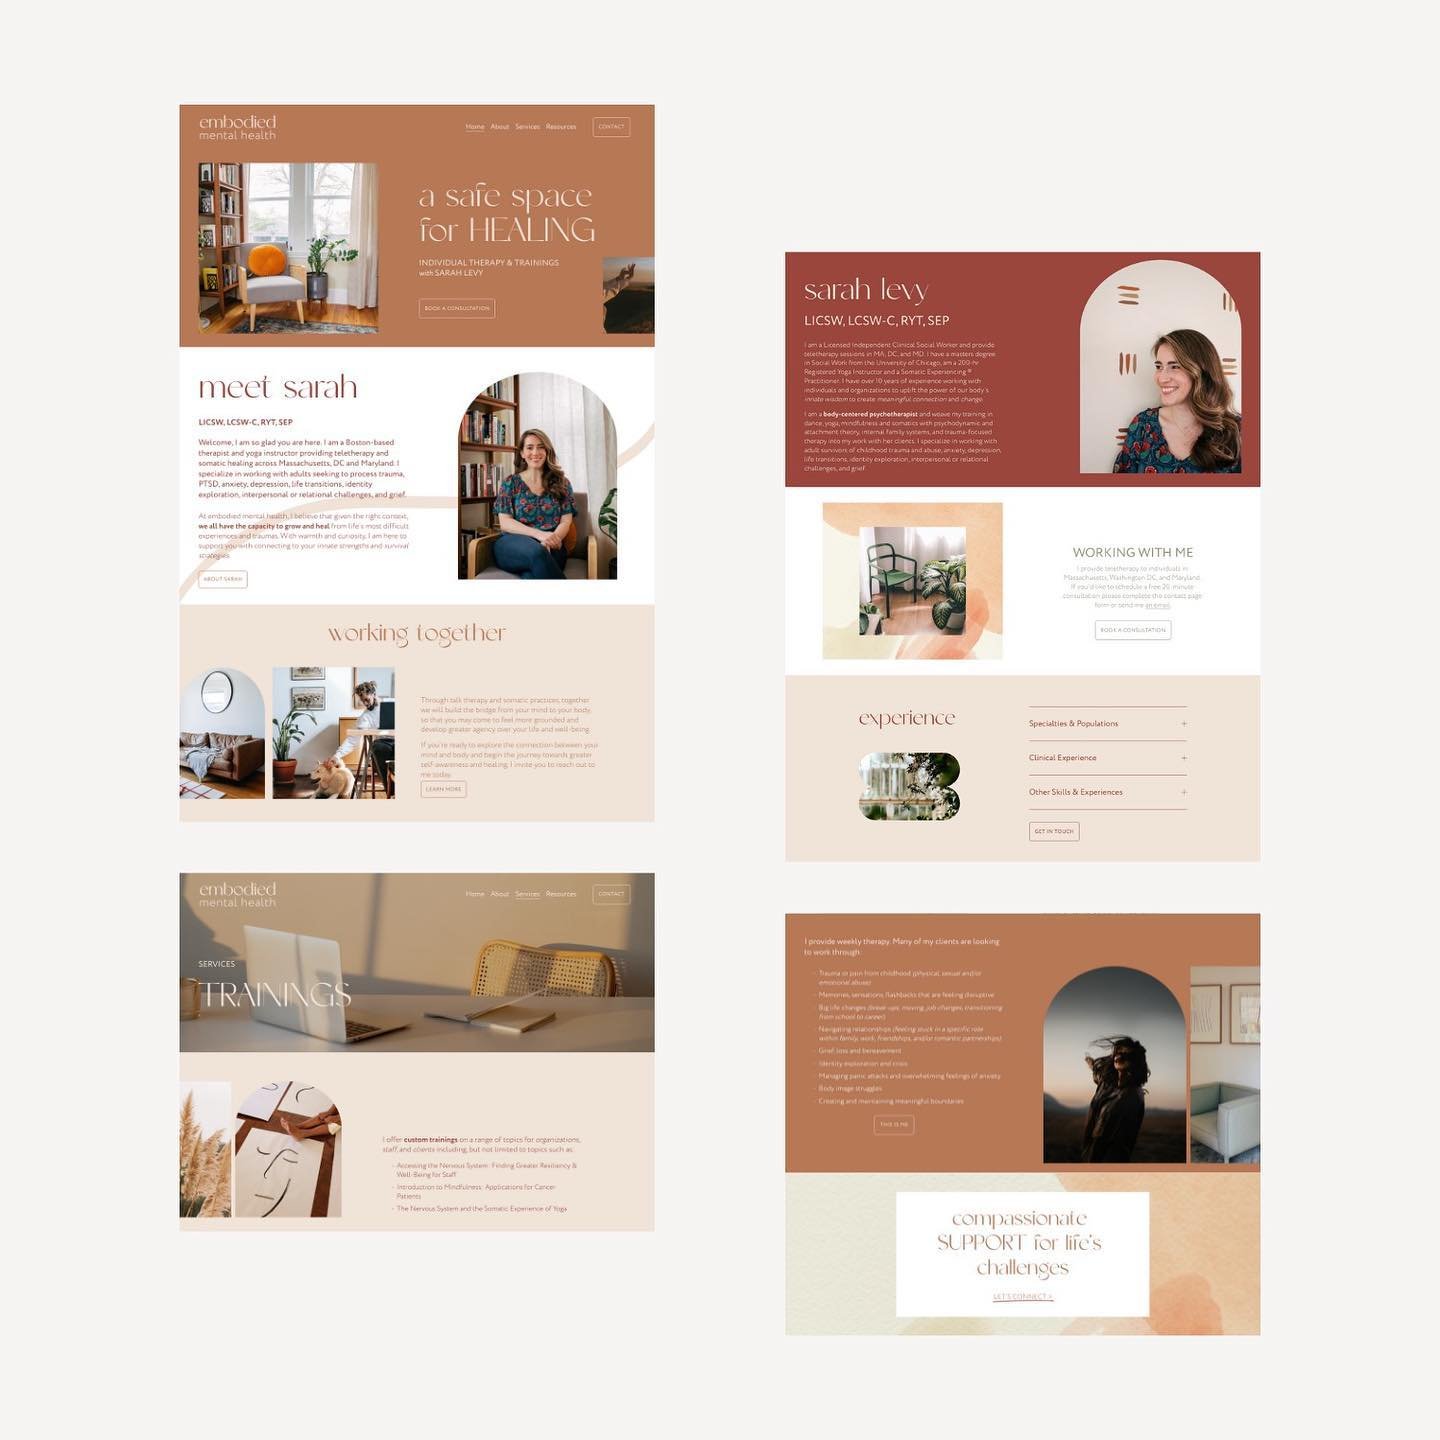 A safe space for healing ✨✨. Introducing Embodied Mental Health&rsquo;s online sanctuary for complete wellness. This customized branding + web project had us building off a grounded and earthy feeling through the branding and site visuals.

Sarah is 